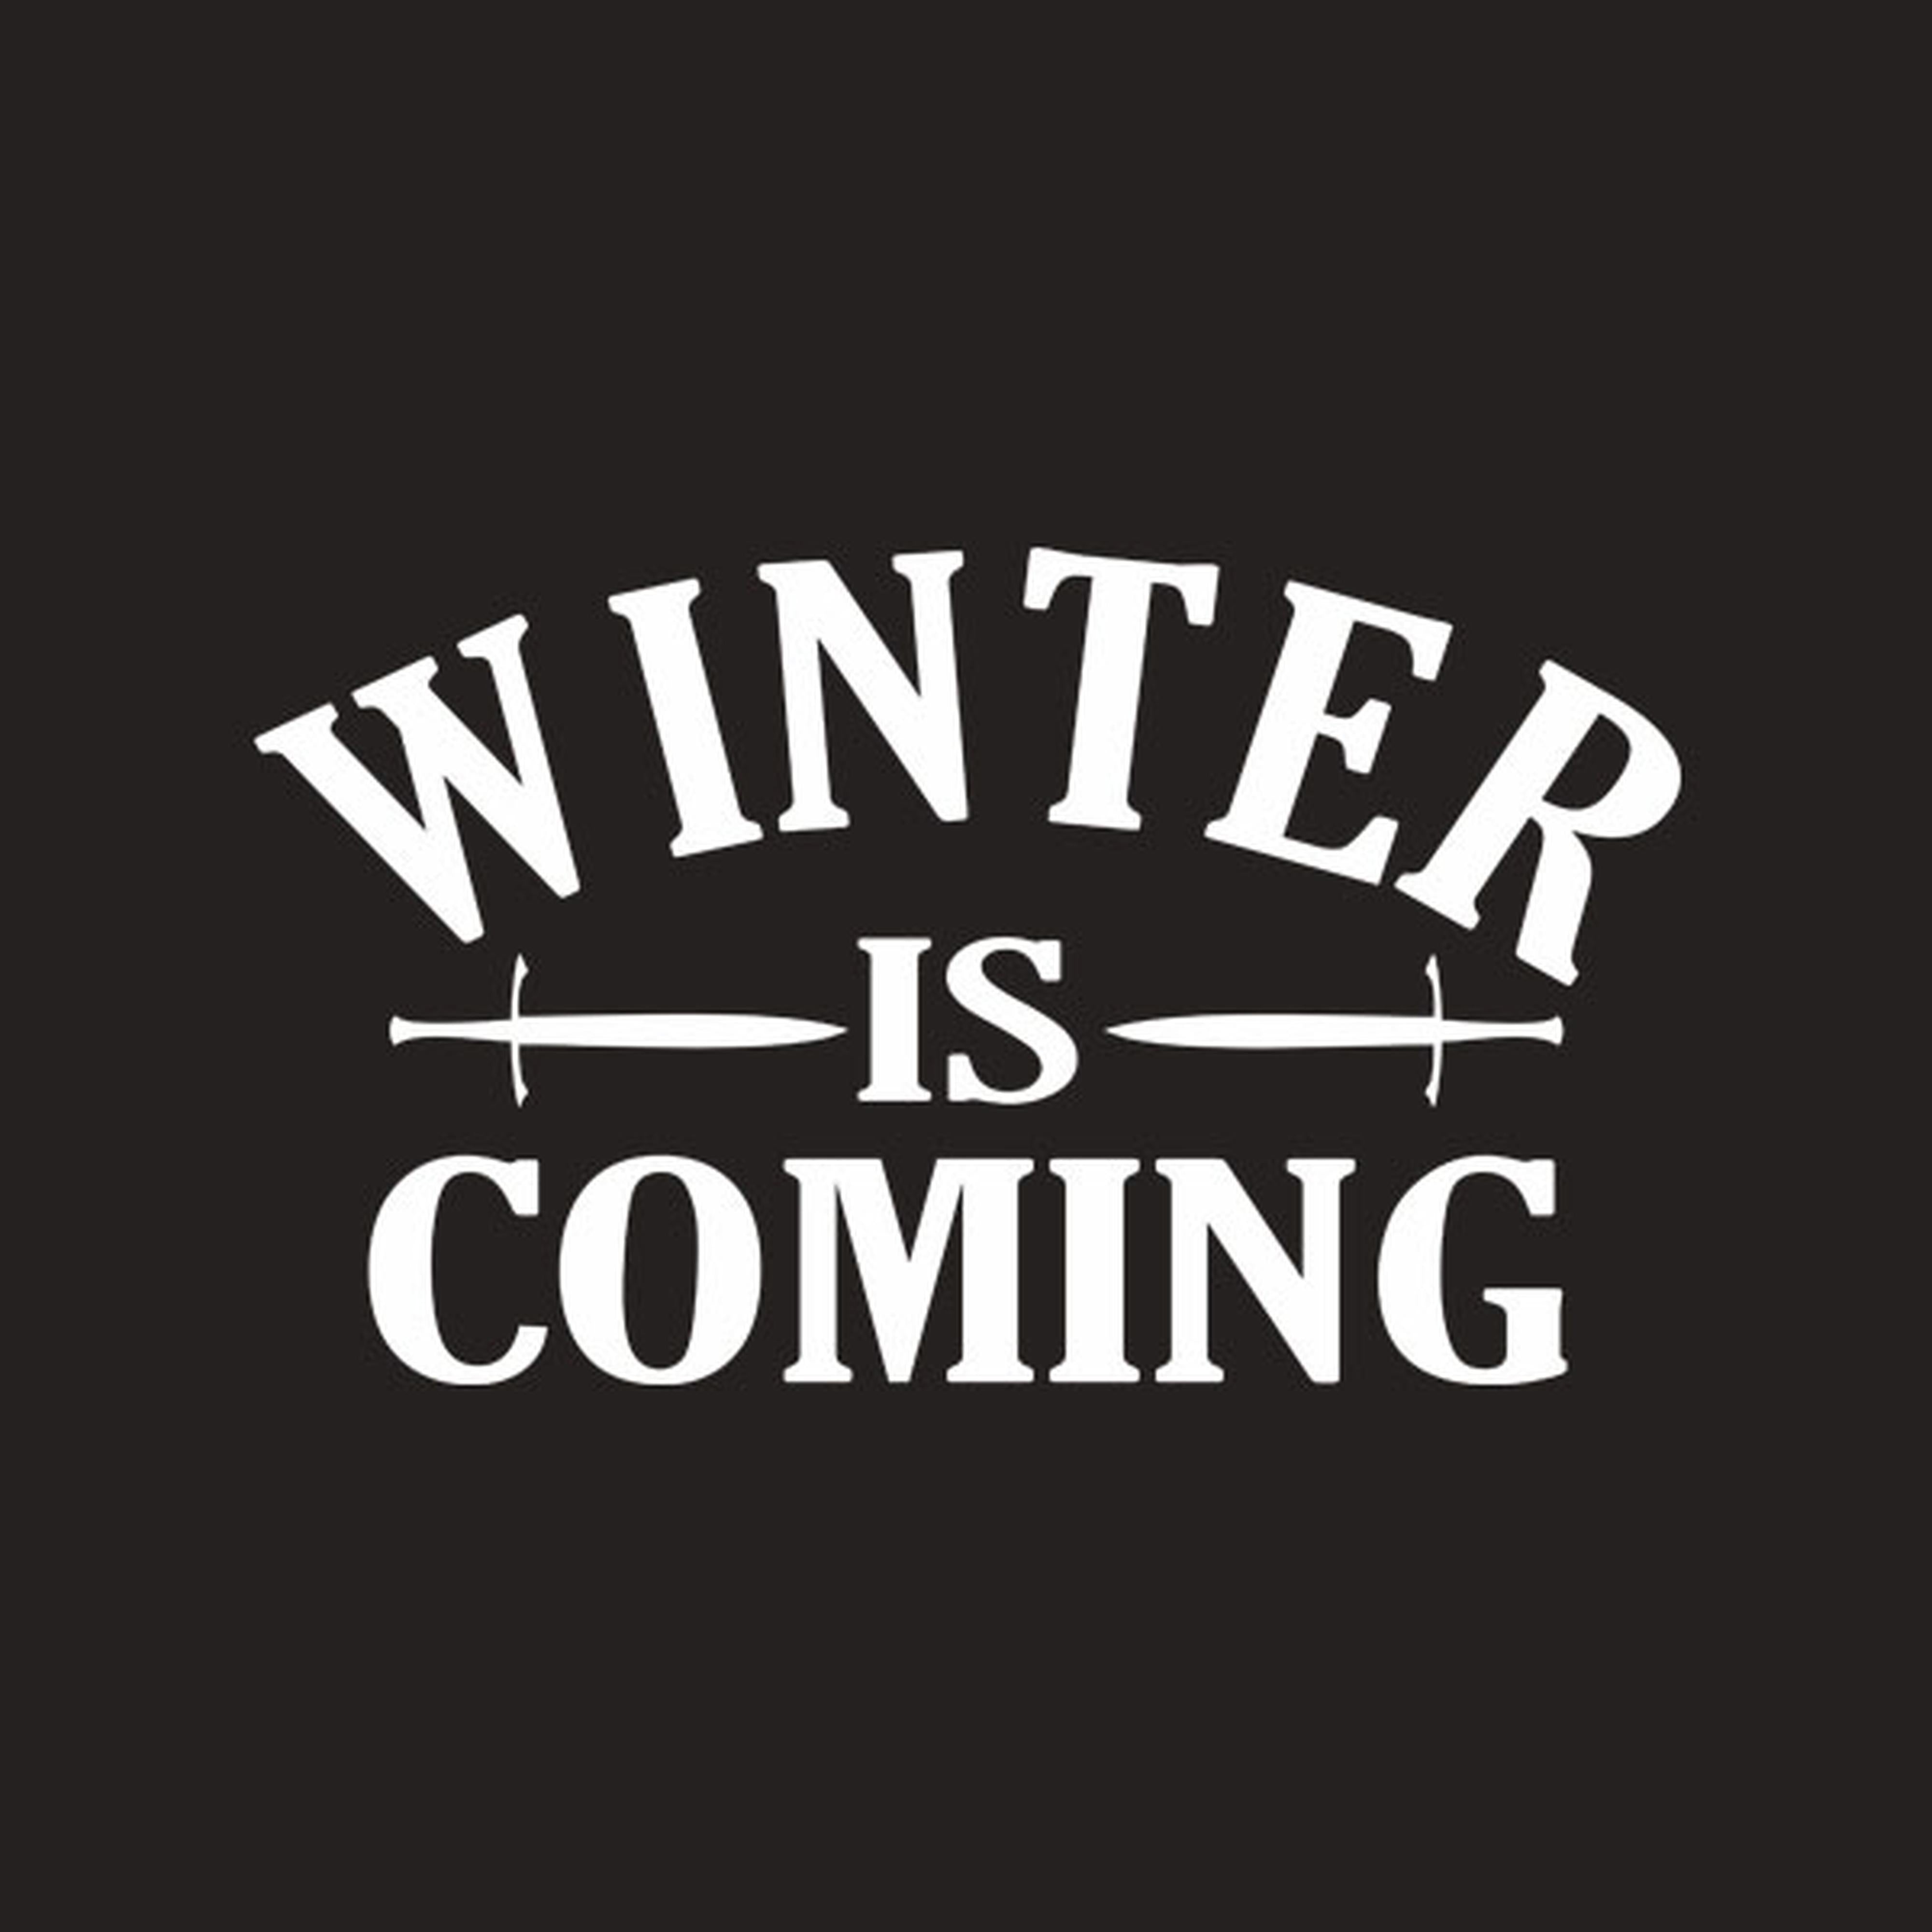 Winter is coming - T-shirt